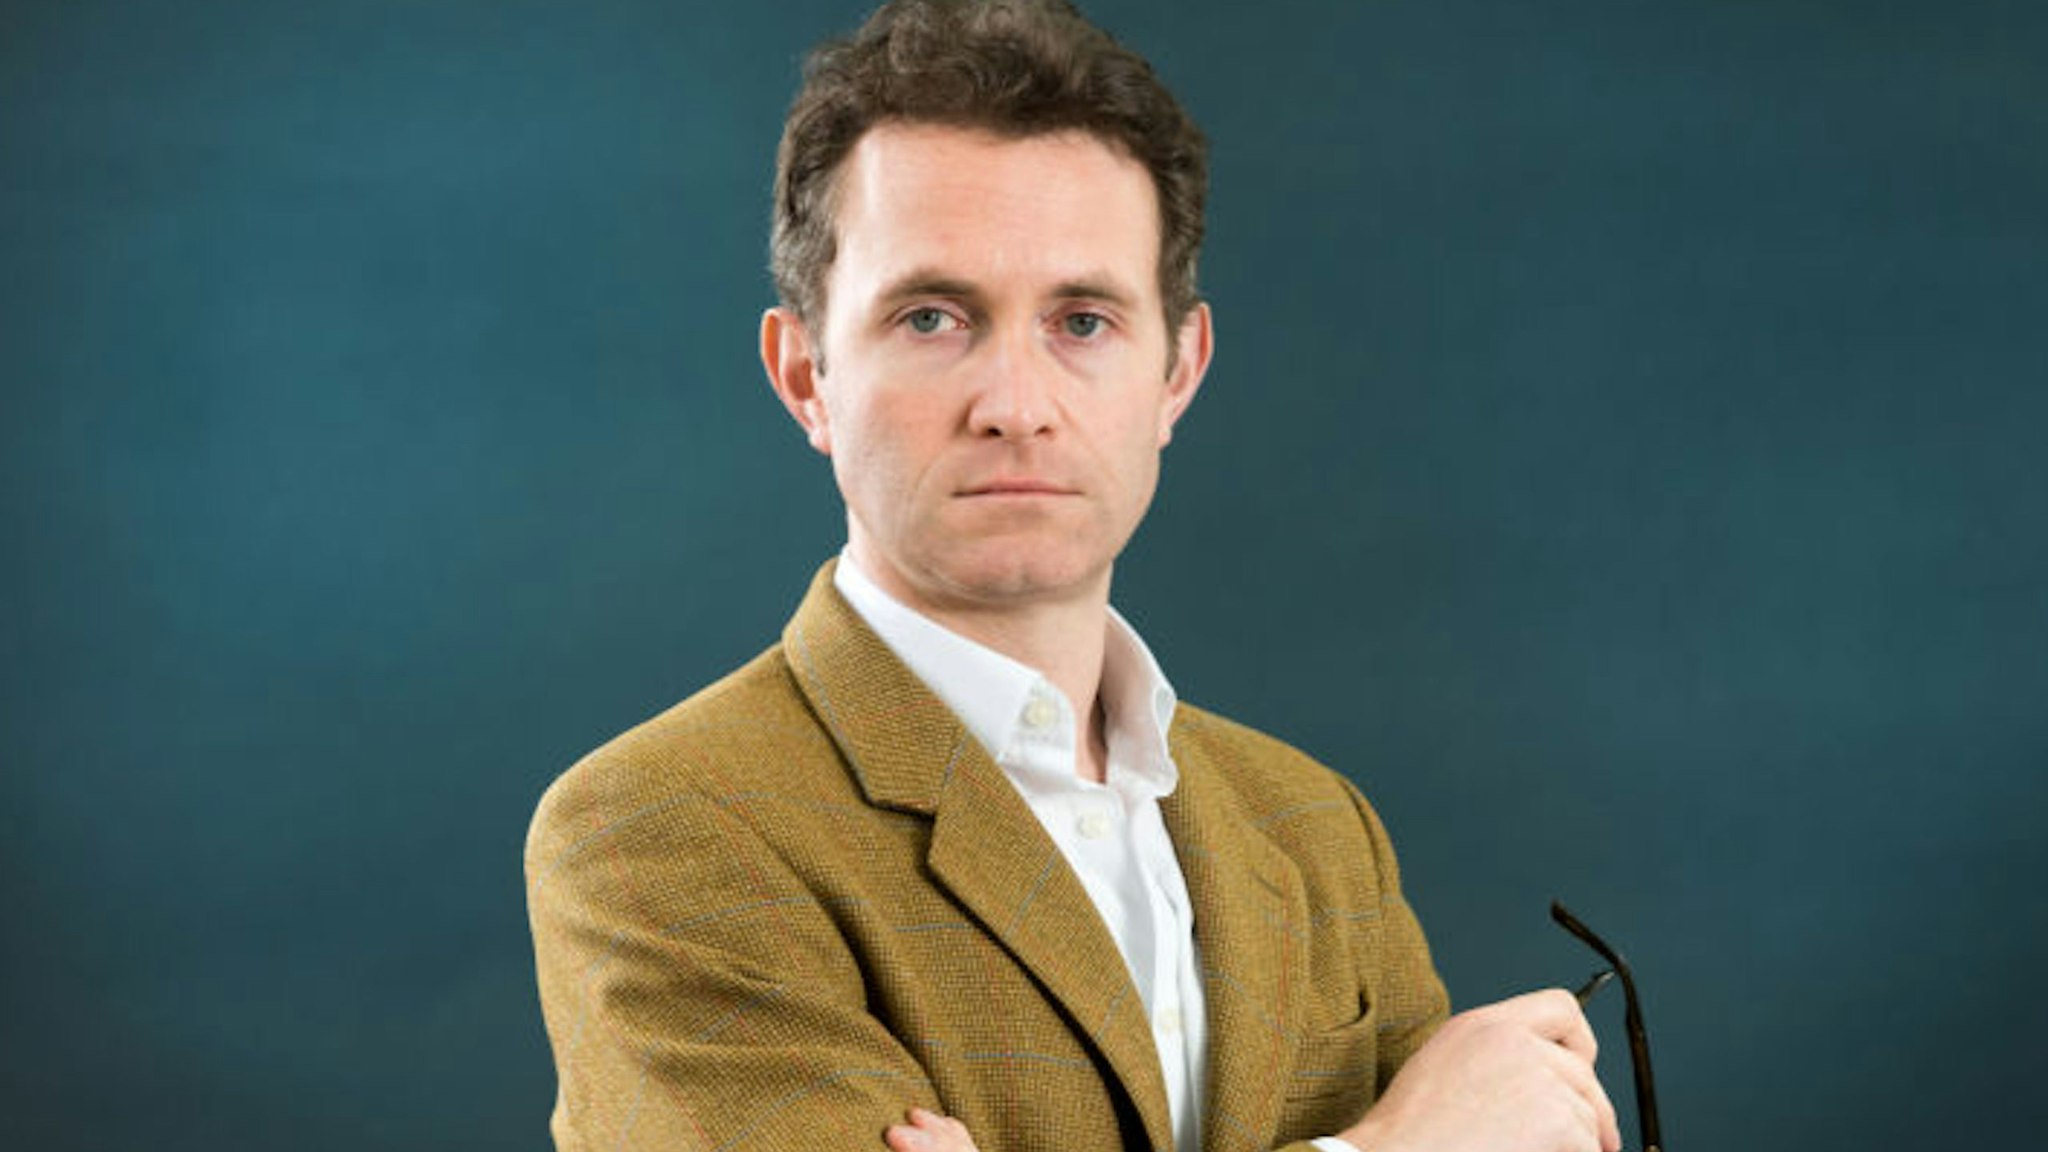 EDINBURGH, SCOTLAND - AUGUST 13: British author, journalist and political commentator Douglas Murray attends a photocall during the annual Edinburgh International Book Festival at Charlotte Square Gardens on August 13, 2017 in Edinburgh, Scotland.